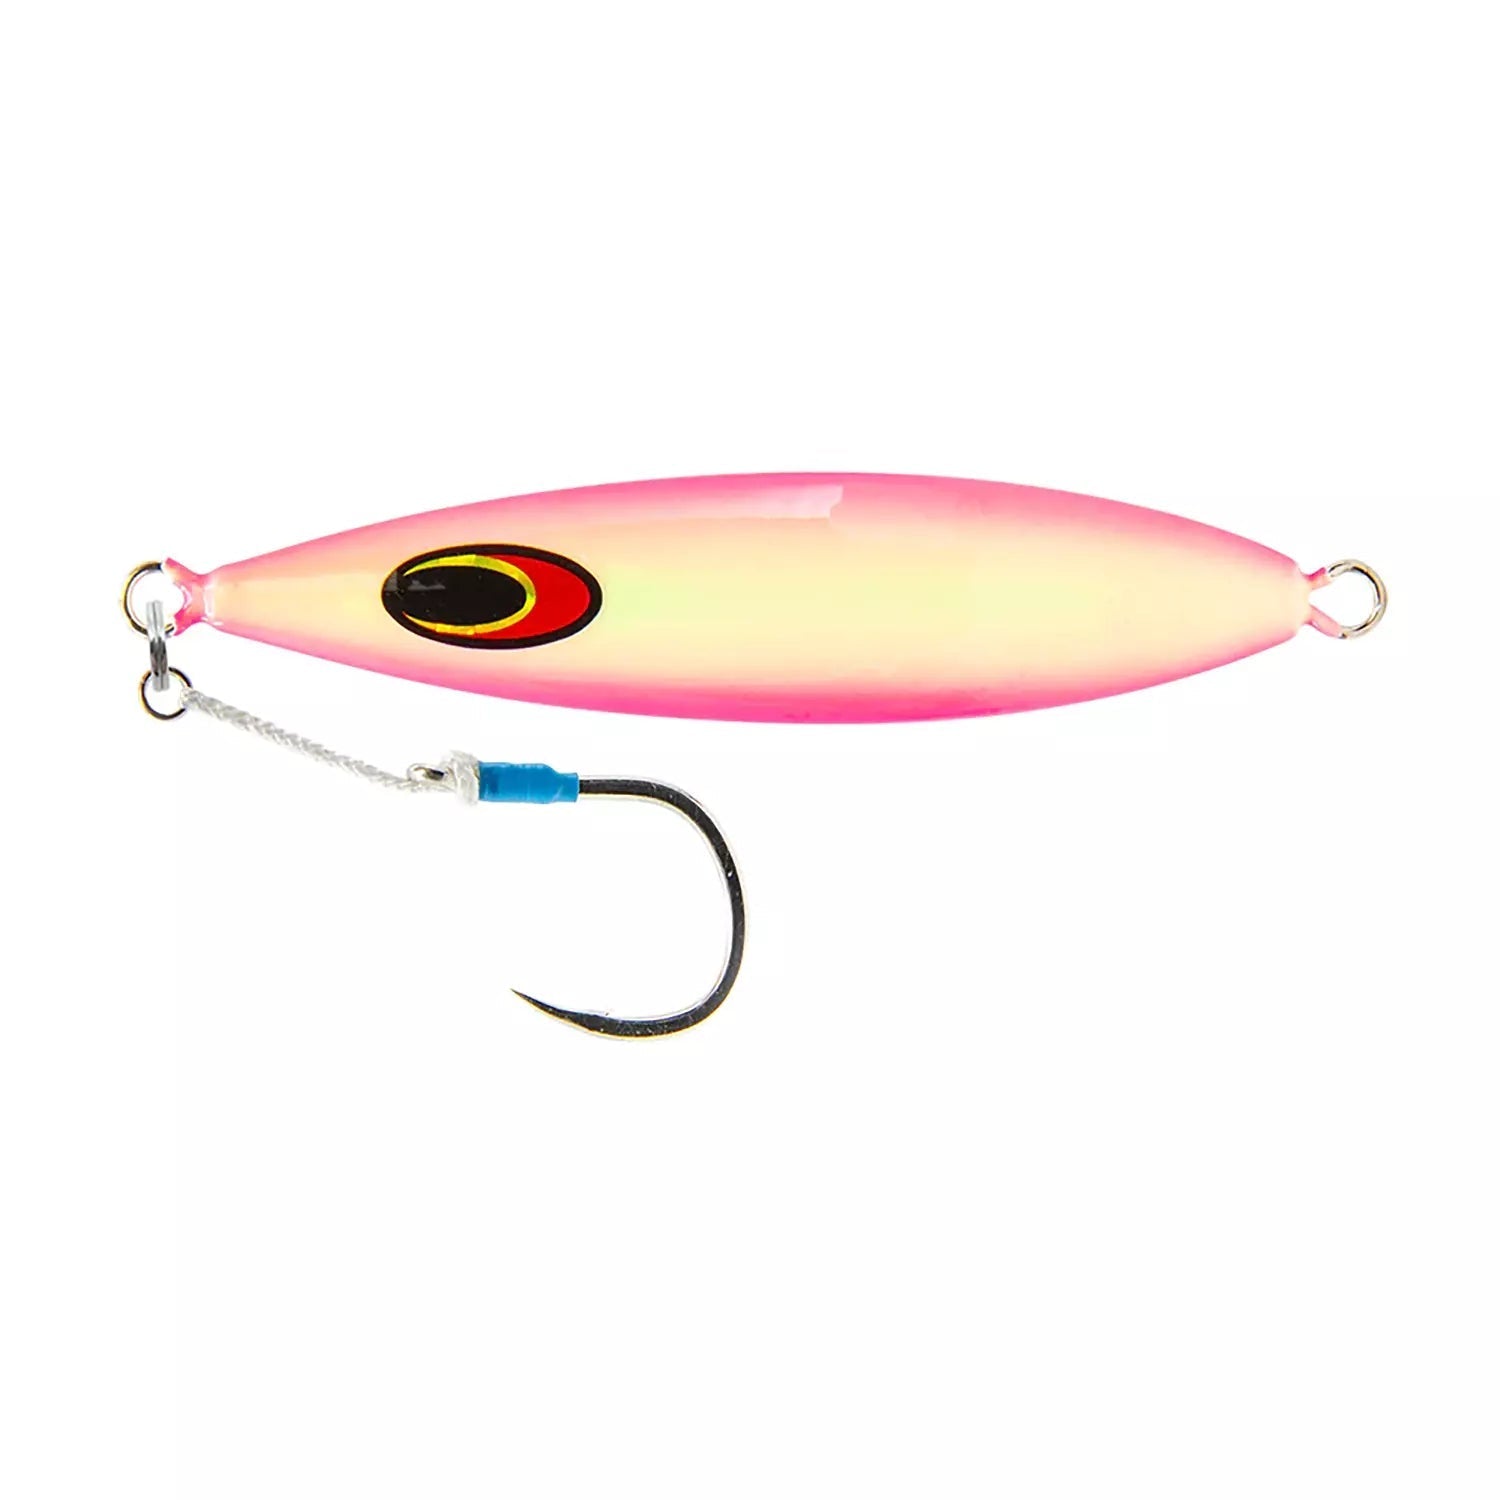 Nomad Gypsea Jig-Lure - Jig-Nomad-60g-Full Glow Pink-Fishing Station